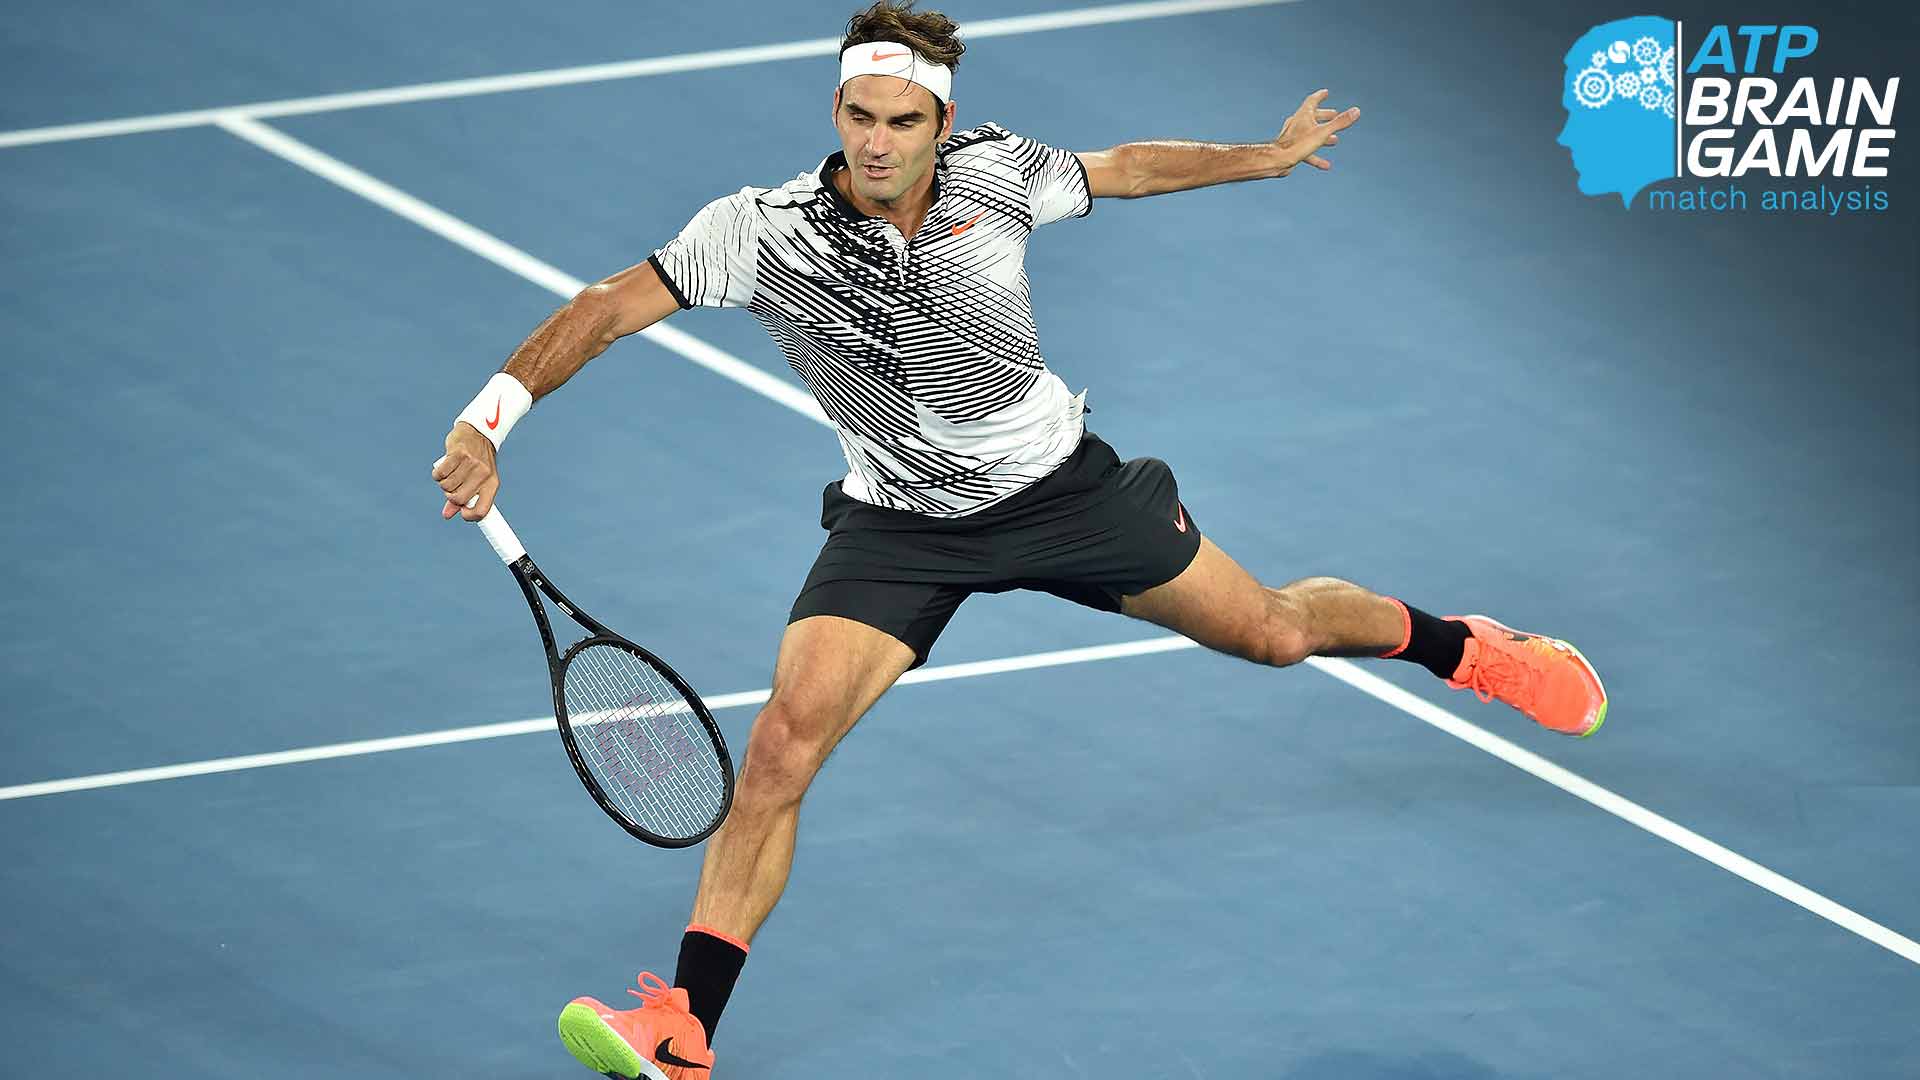 Brain Game: Roger Federer Charges His Way To Australian Open Title